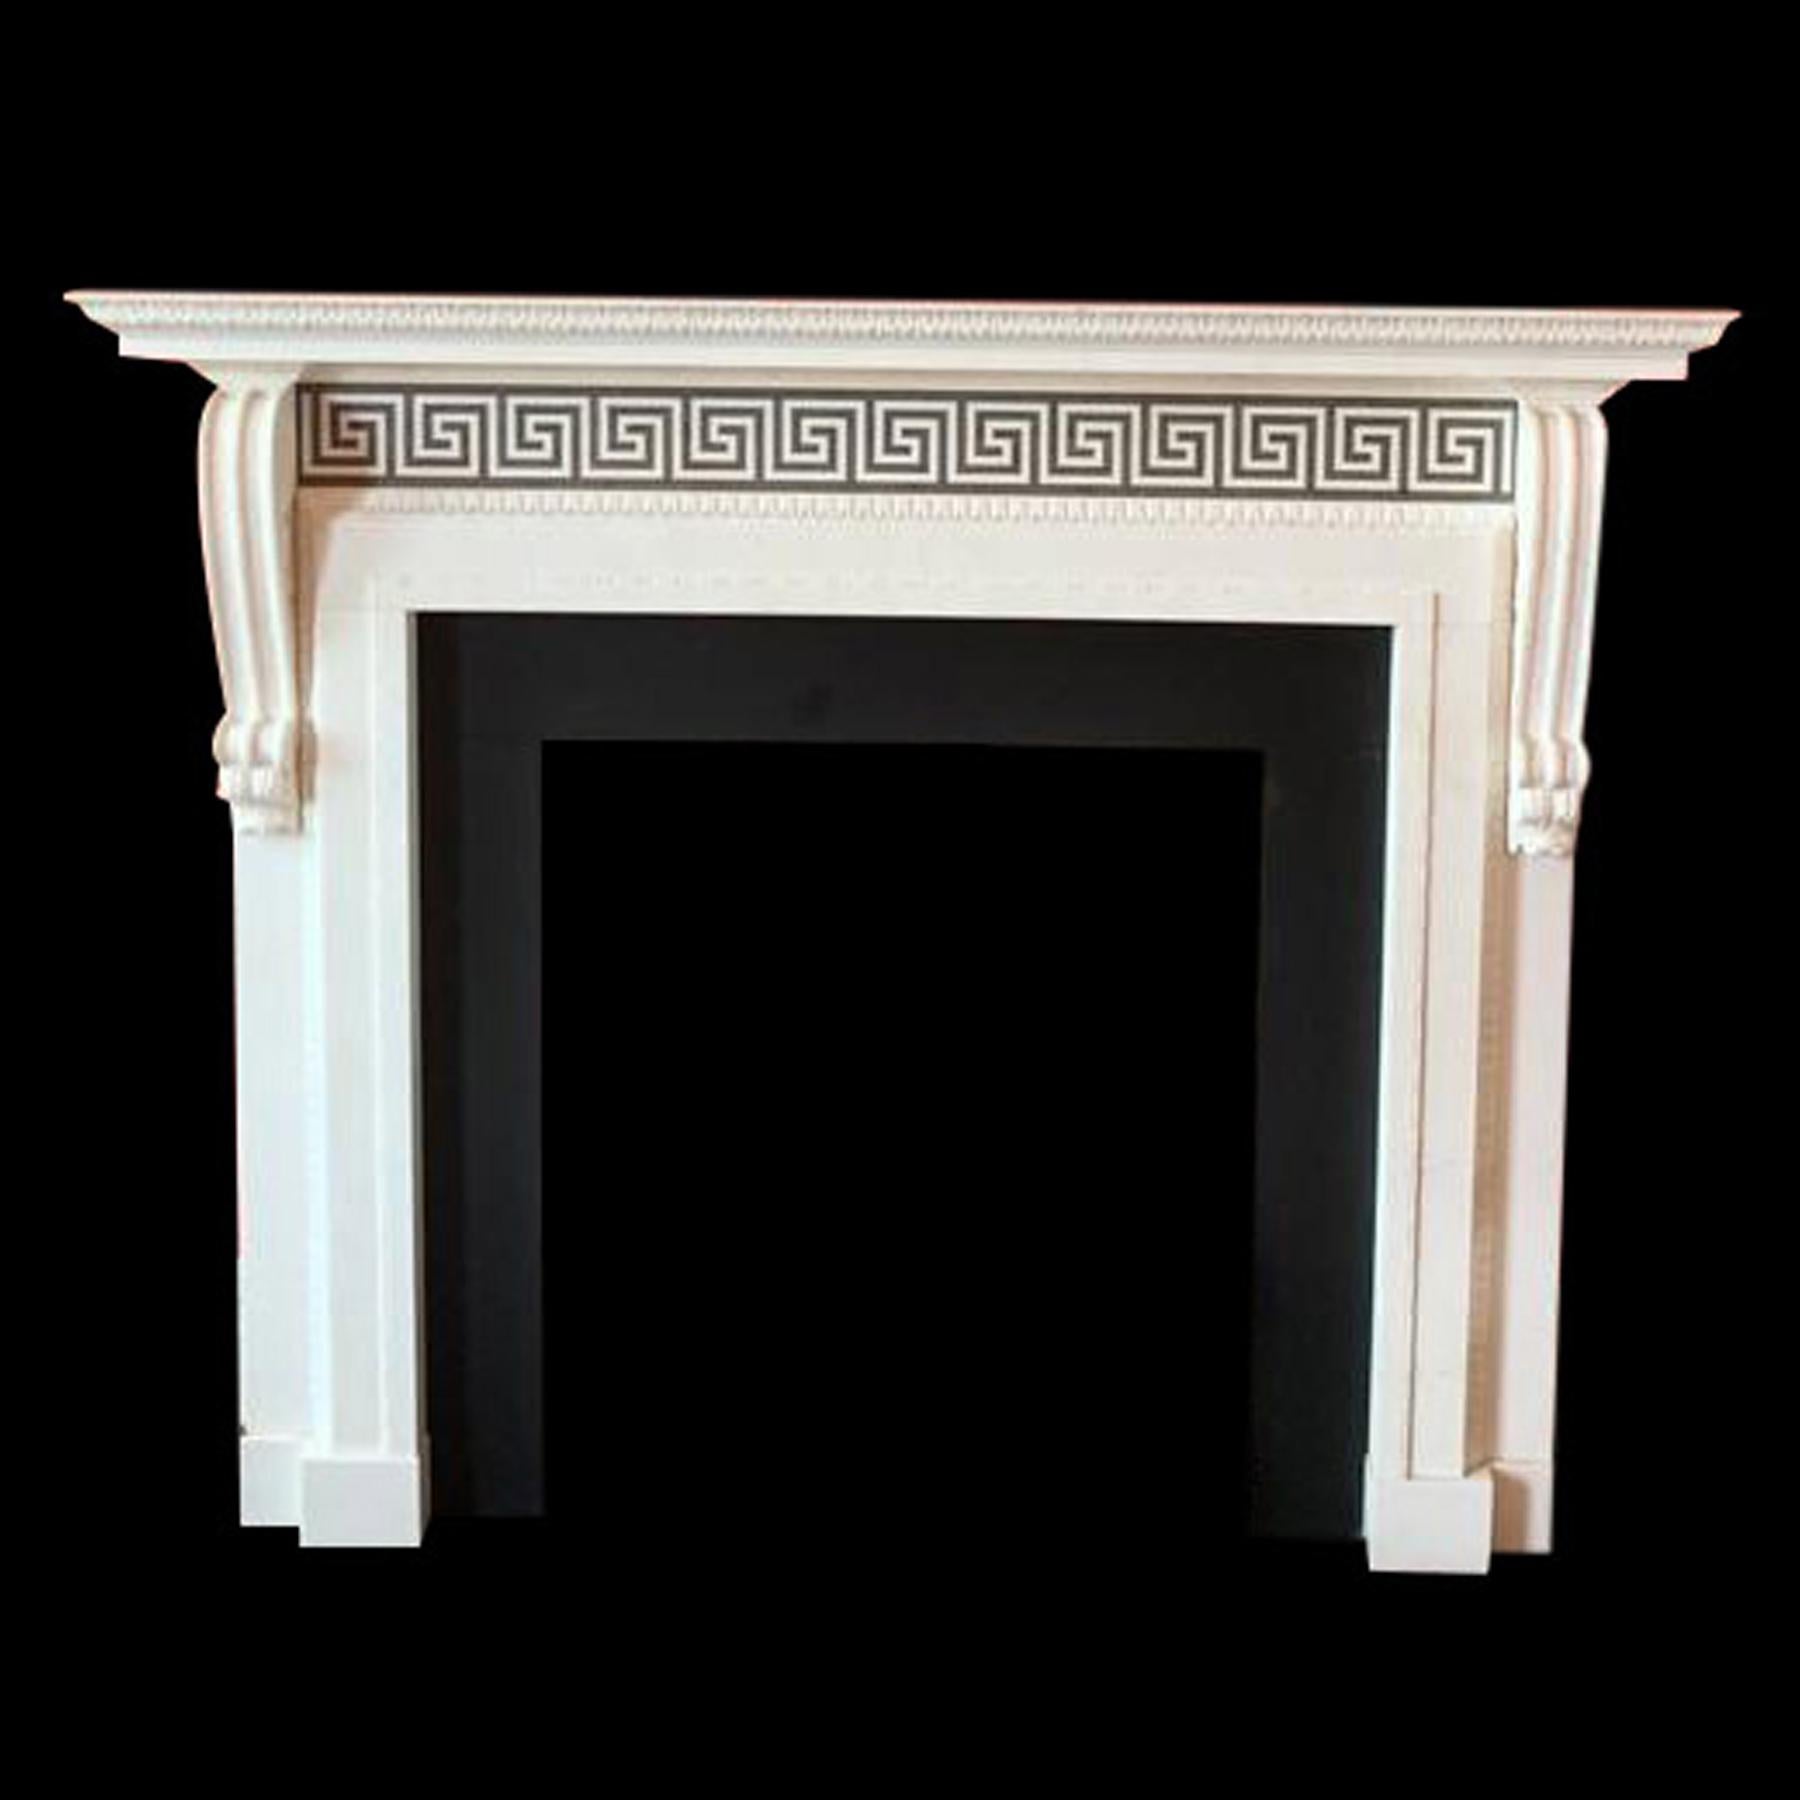 Very happy to offer this handsome pair of Georgian Style Chimneypieces.

Carved Corniced Shelf above a runnng frieze with a Greek key Azul Valverde inlay and jambs that terminate in delicately carved console.

Fireplaces are priced seperately and